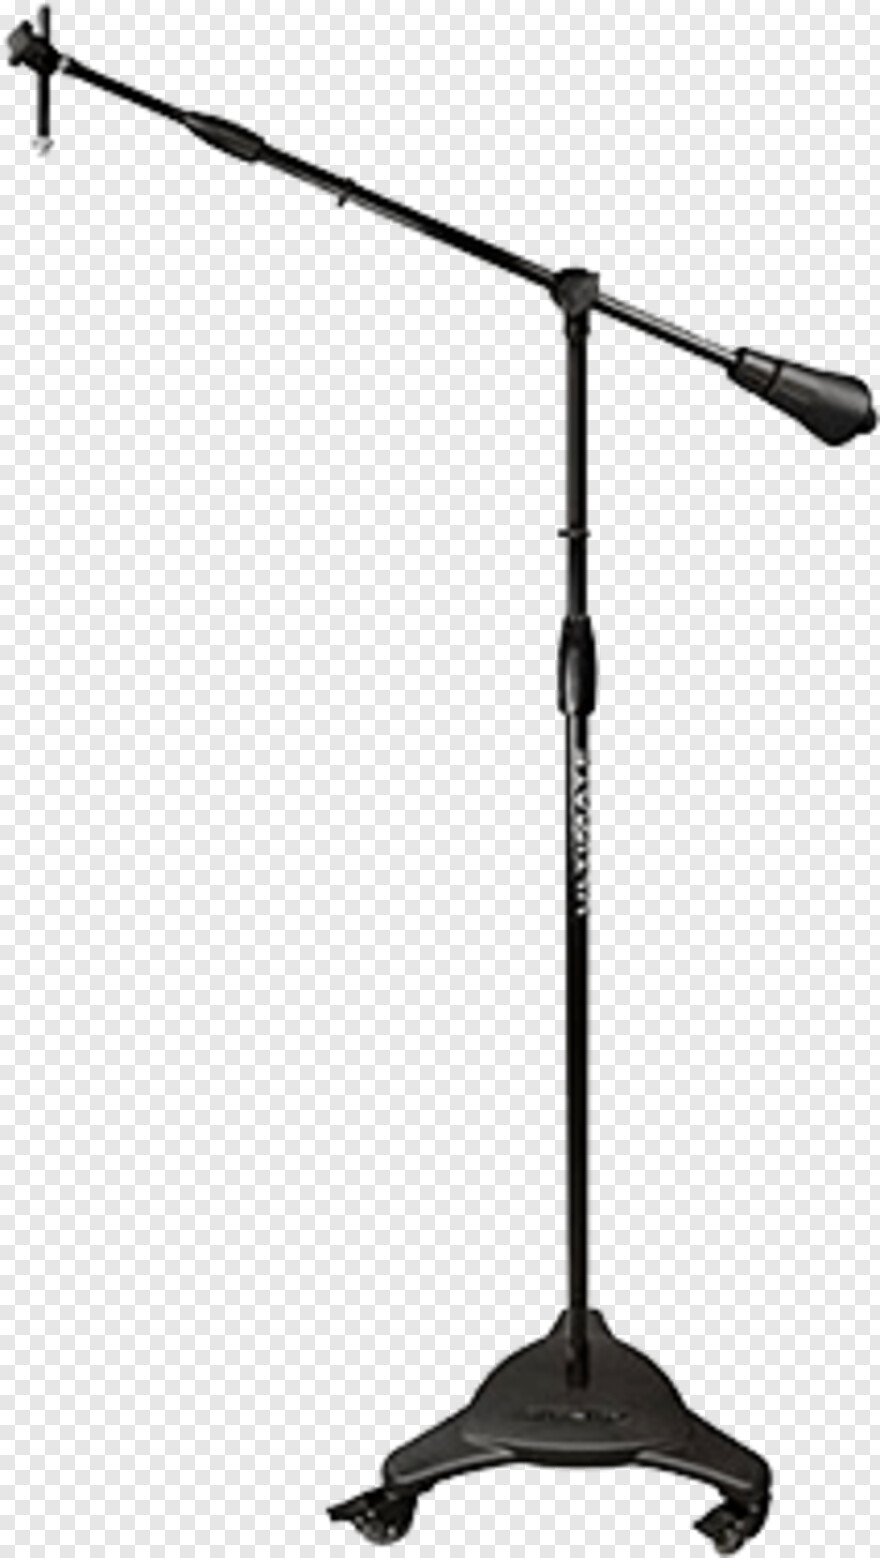 microphone-stand # 331650